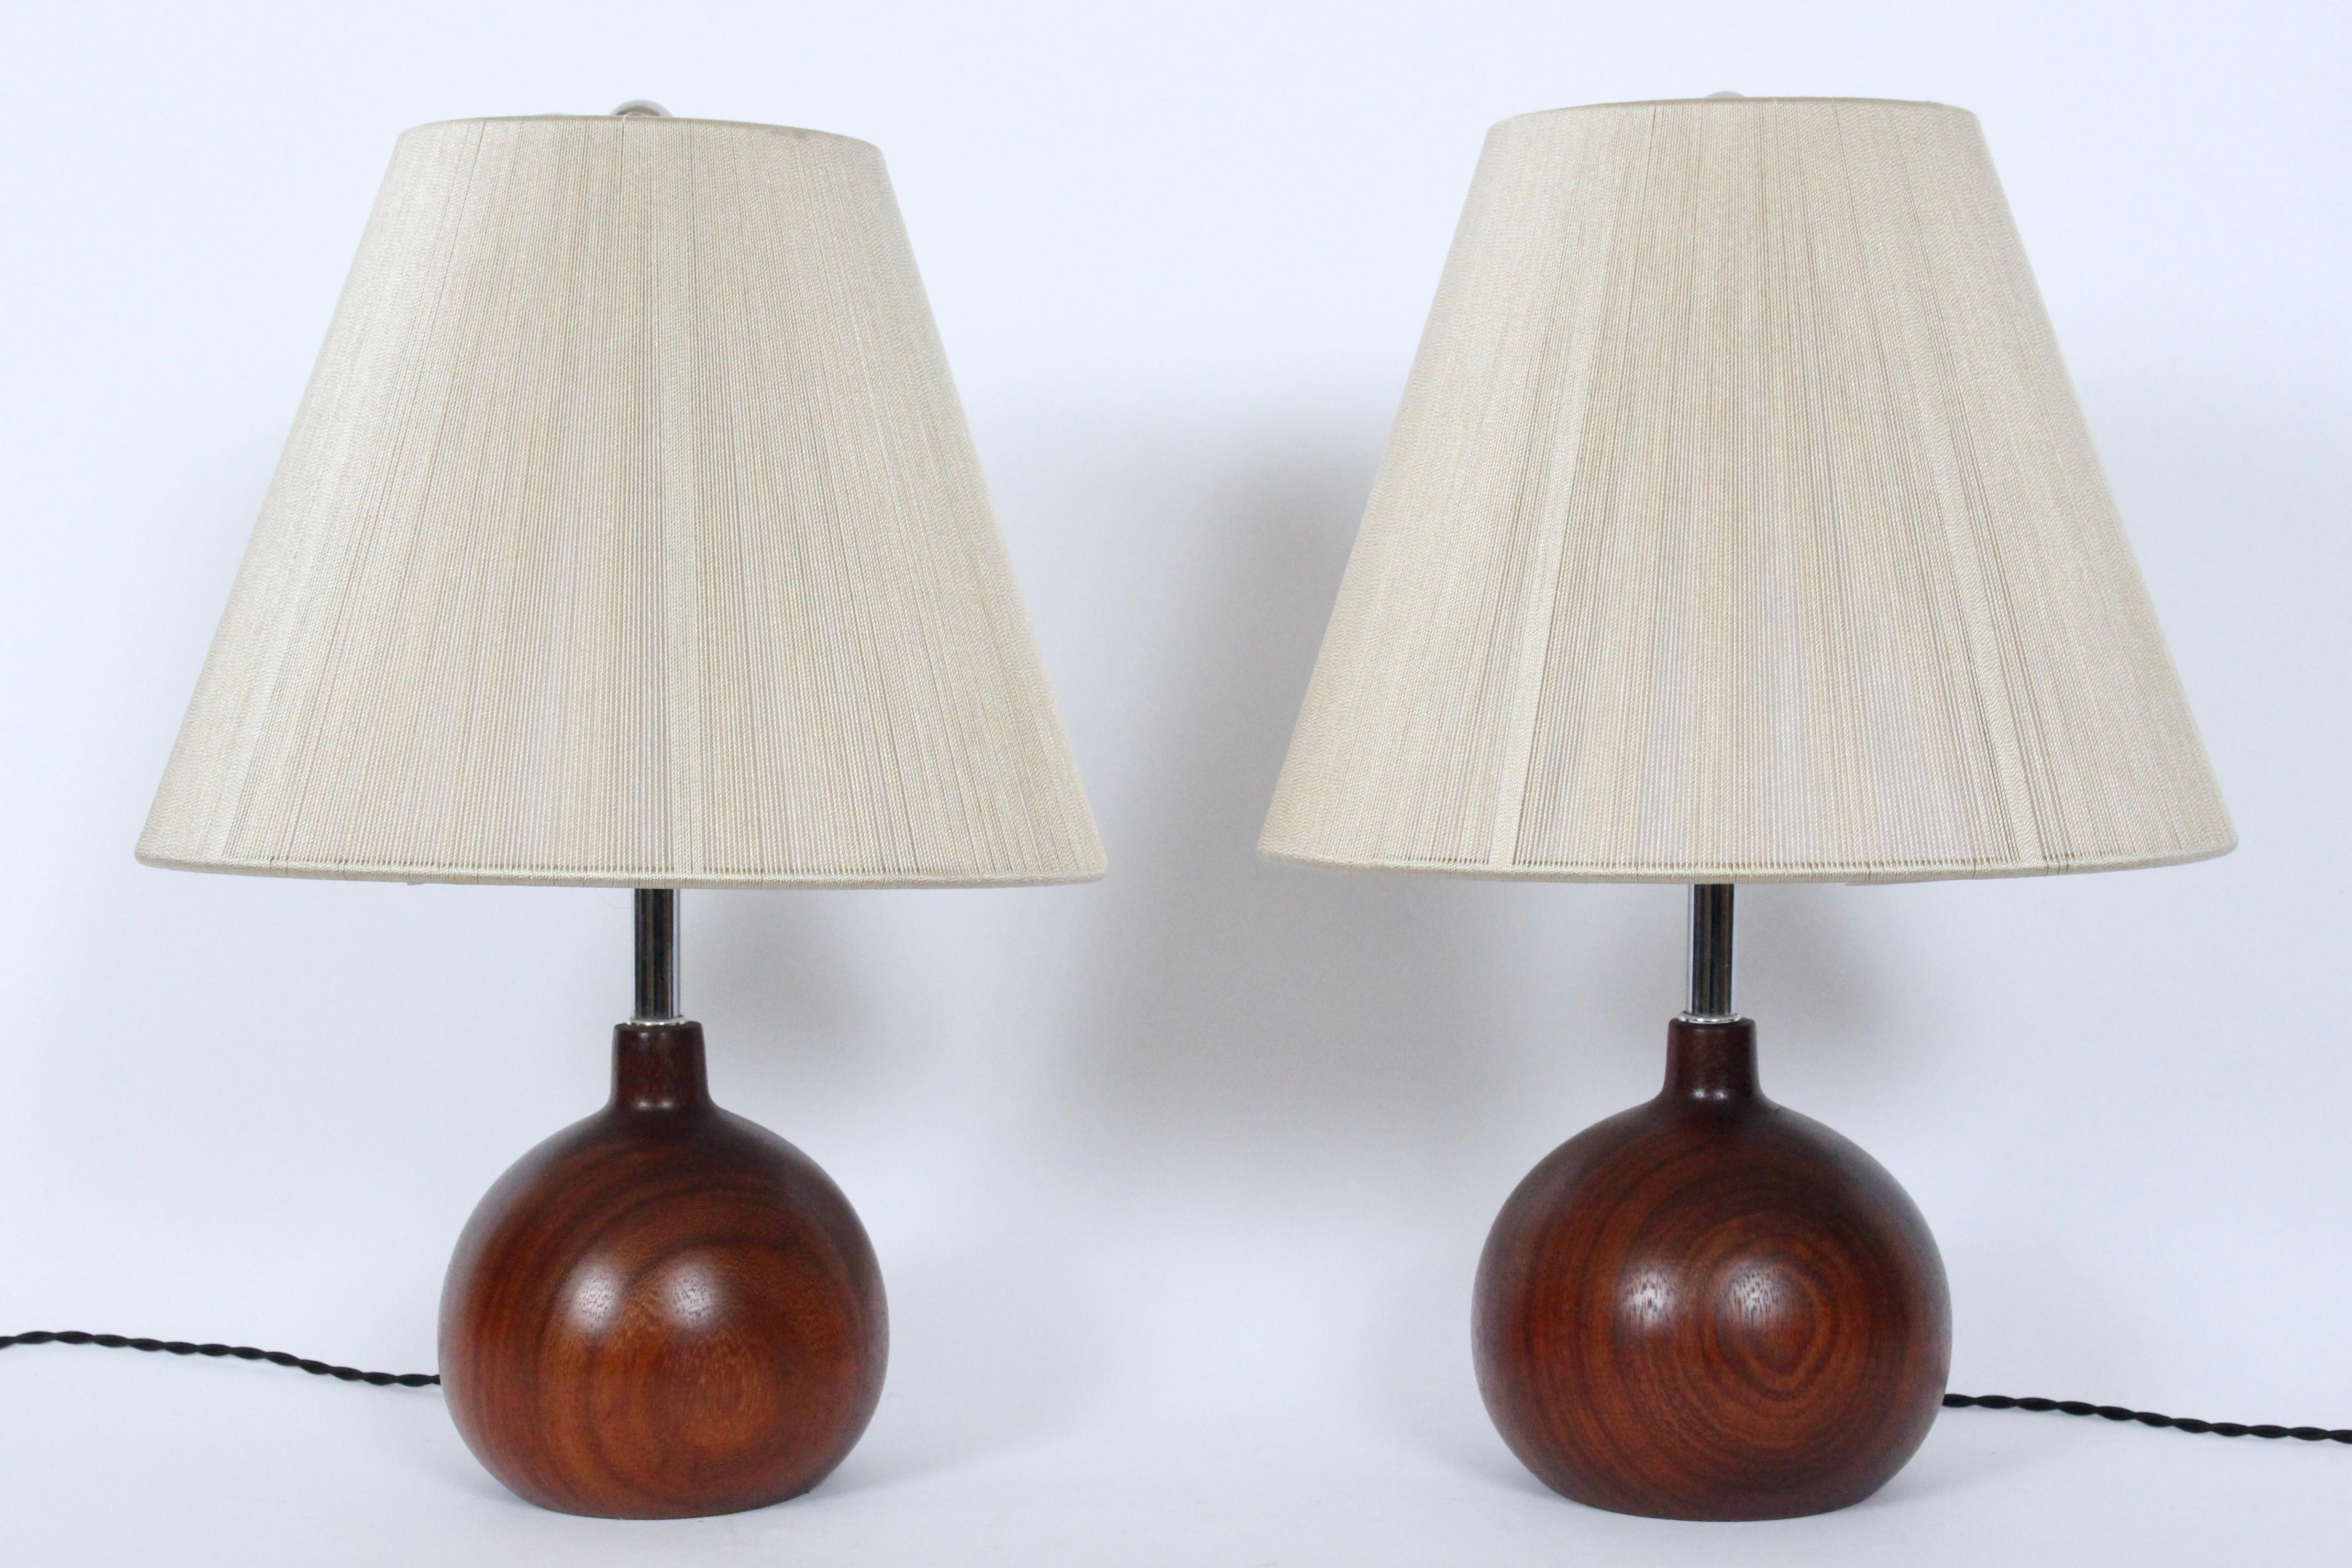 Pair of Danish Modern ESA style dark solid teak table lamps, 1970's. Featuring finely grained, staved Dark Teak globe forms with tubular Chrome stems. 10.5 H to top of Socket. 6H to top of Wood. Shades shown for display only ( 9.5H x 6D top x 12D